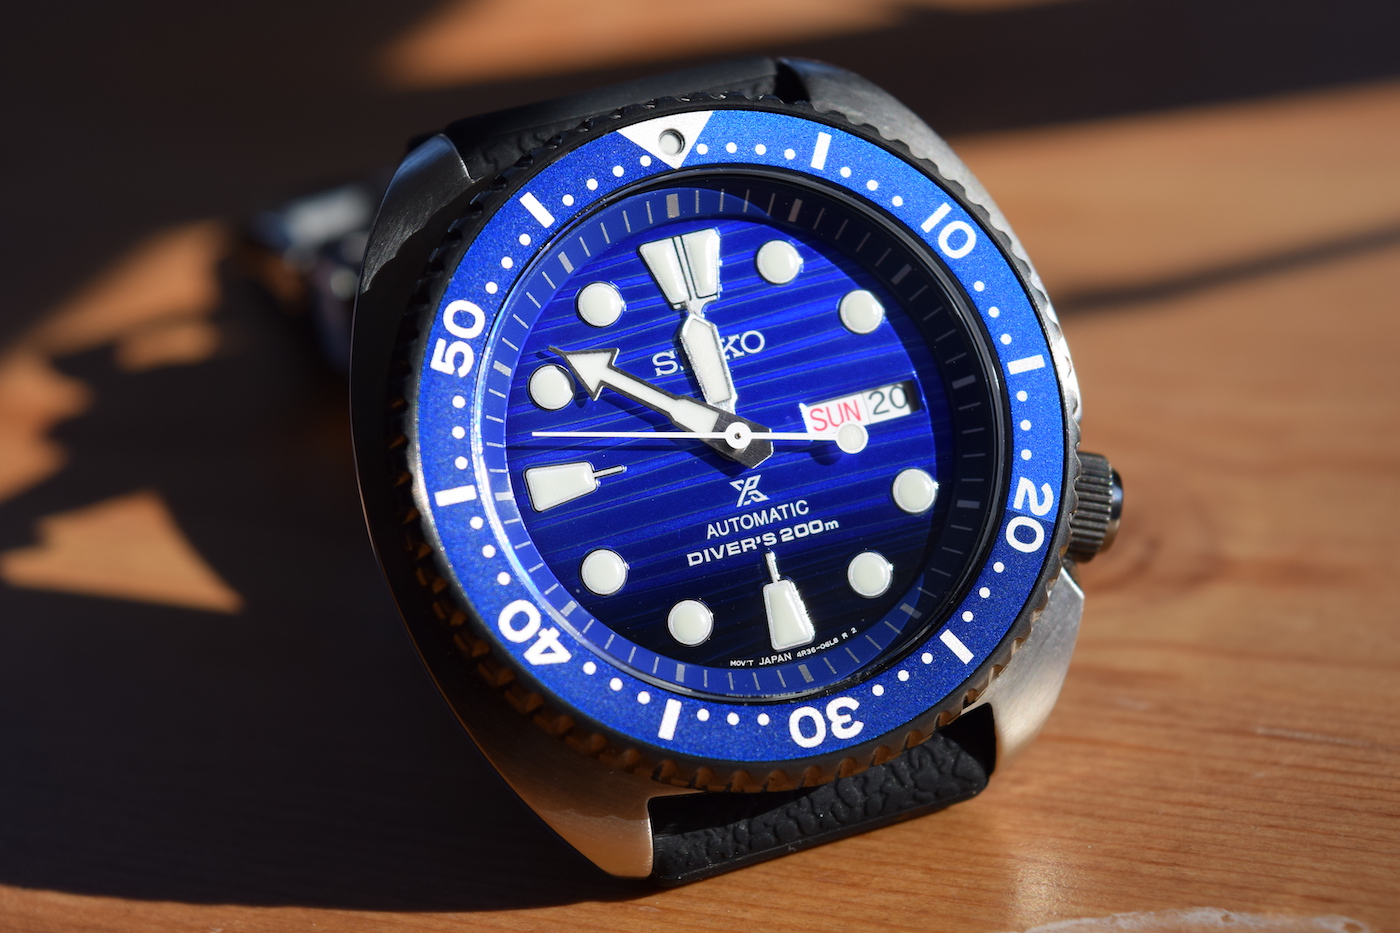 Seiko SRPC91K1 Save the Ocean Turtle Wrist Time Review